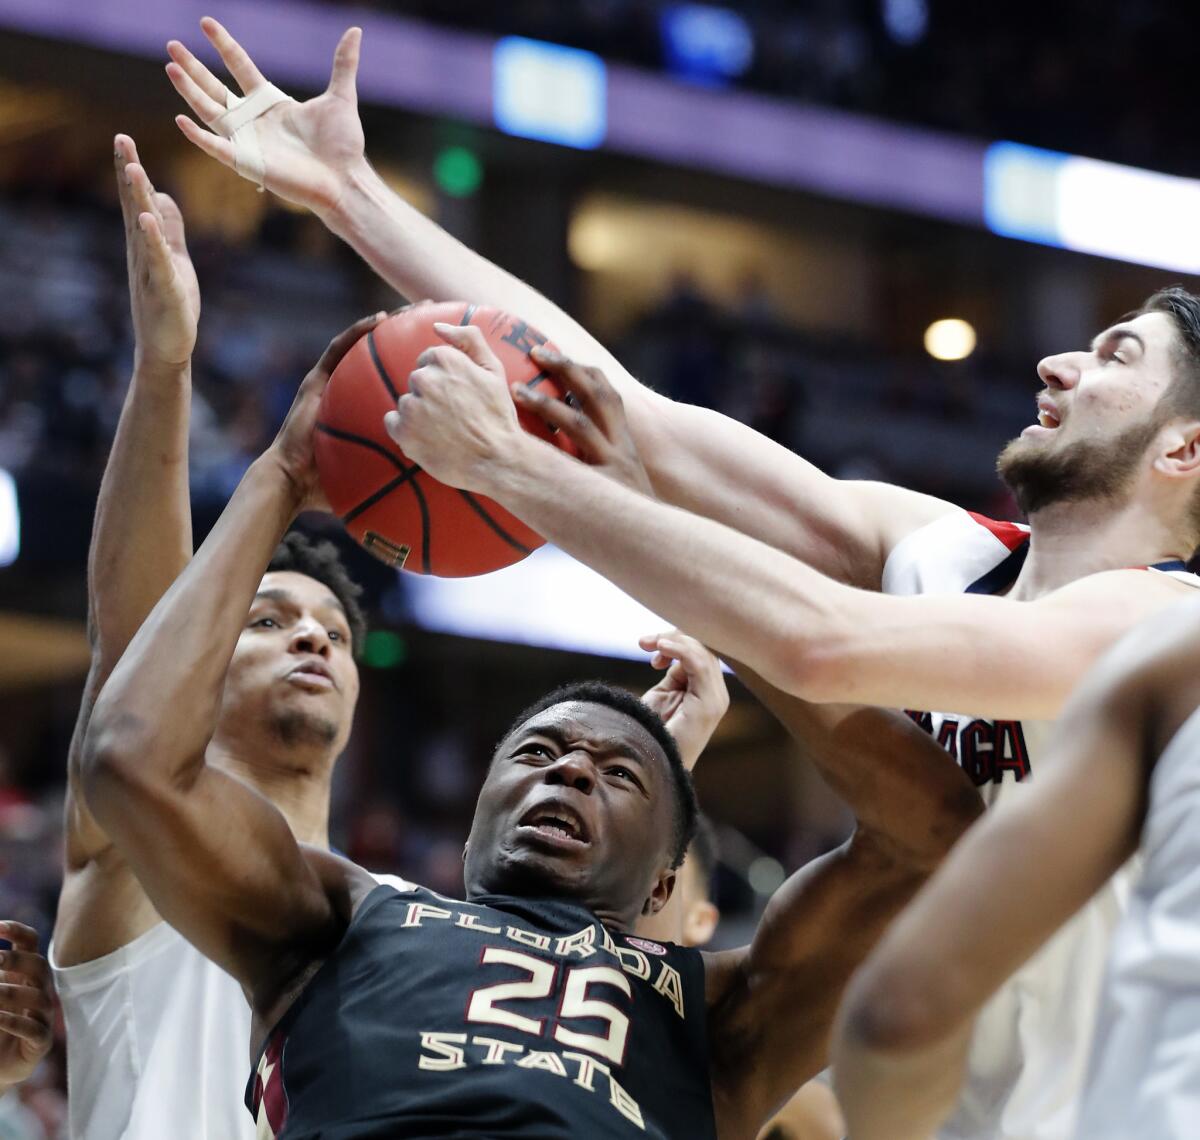 Florida State's forward Mfiondo Kabrngele gets hemmed in by the Gonzaga's defense in the first half.